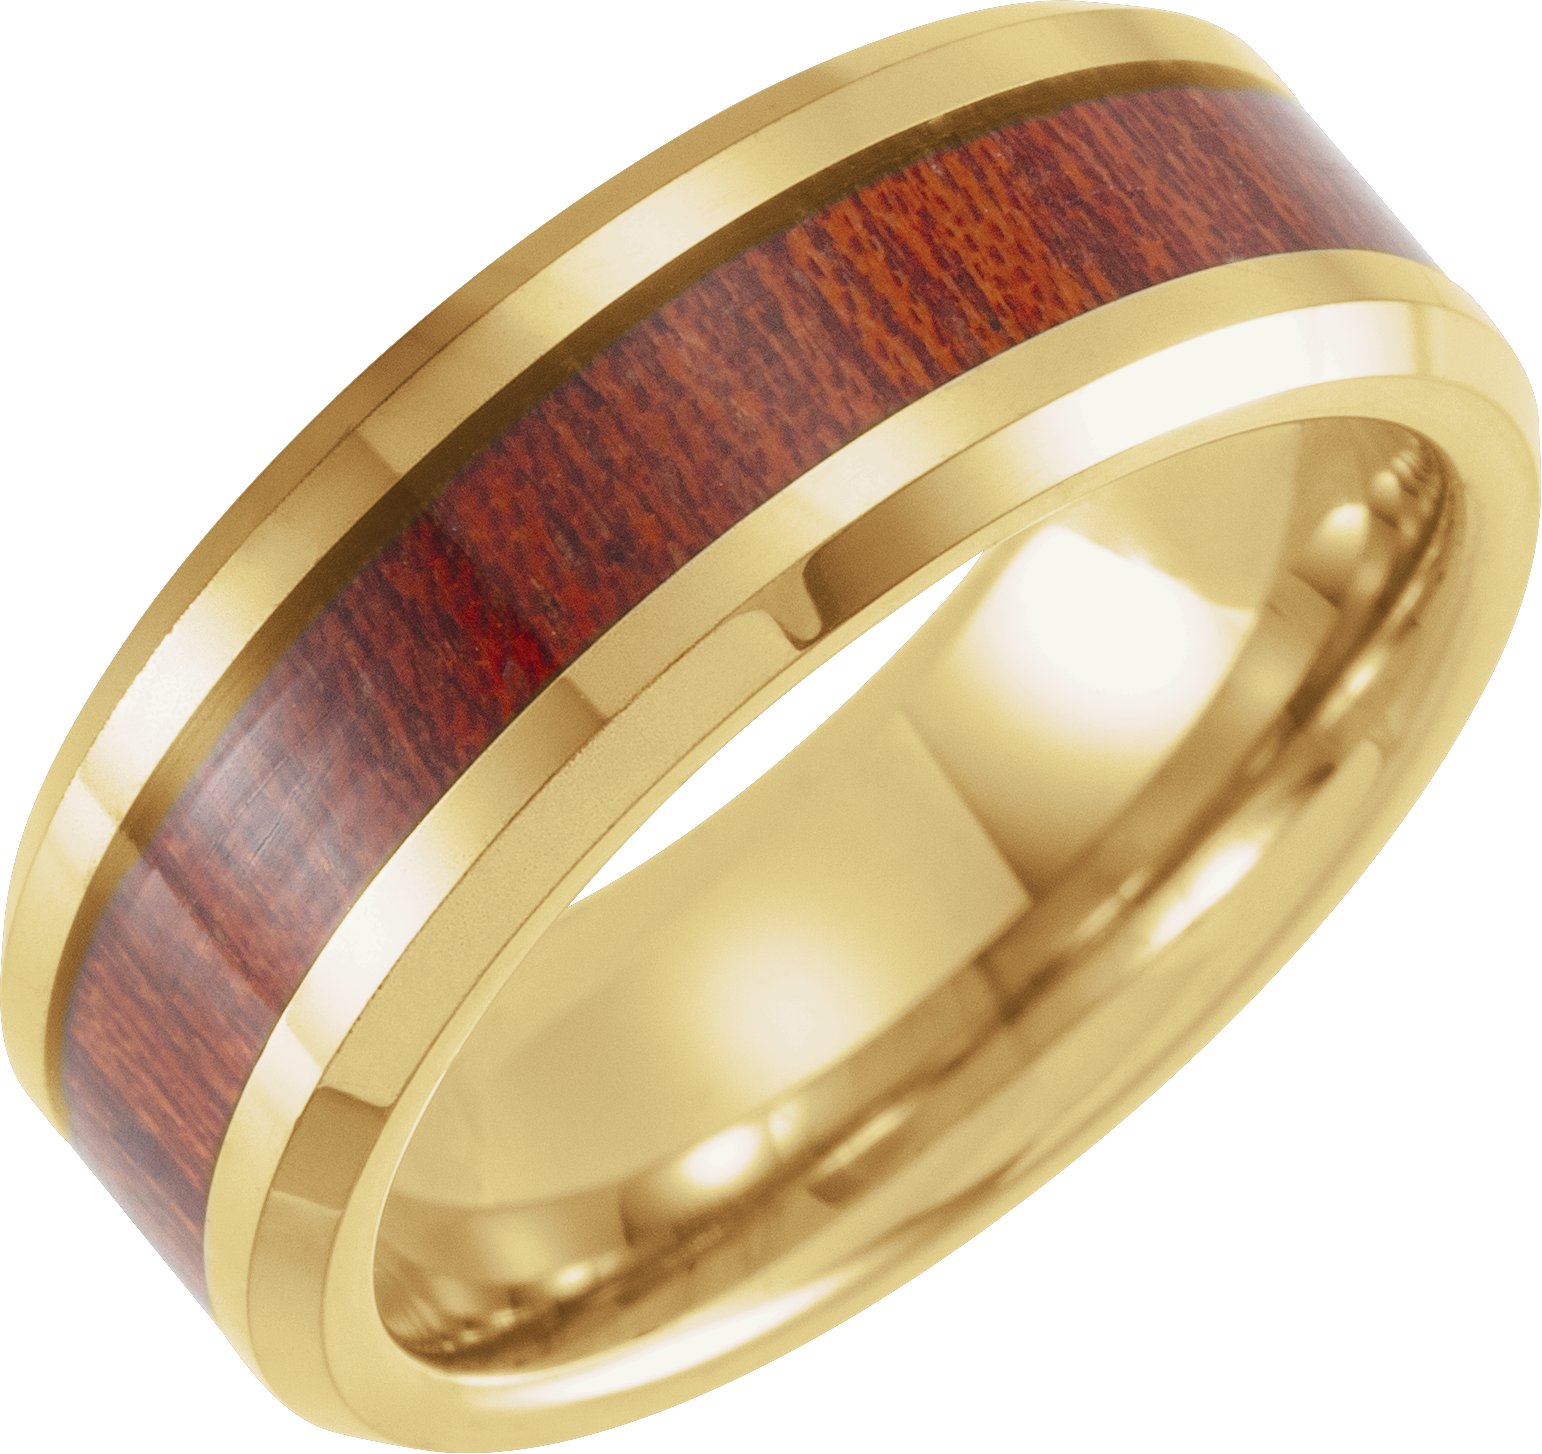 18K Yellow Gold PVD Tungsten 8 mm Beveled Band with Walnut Wood Inlay Size 8.5